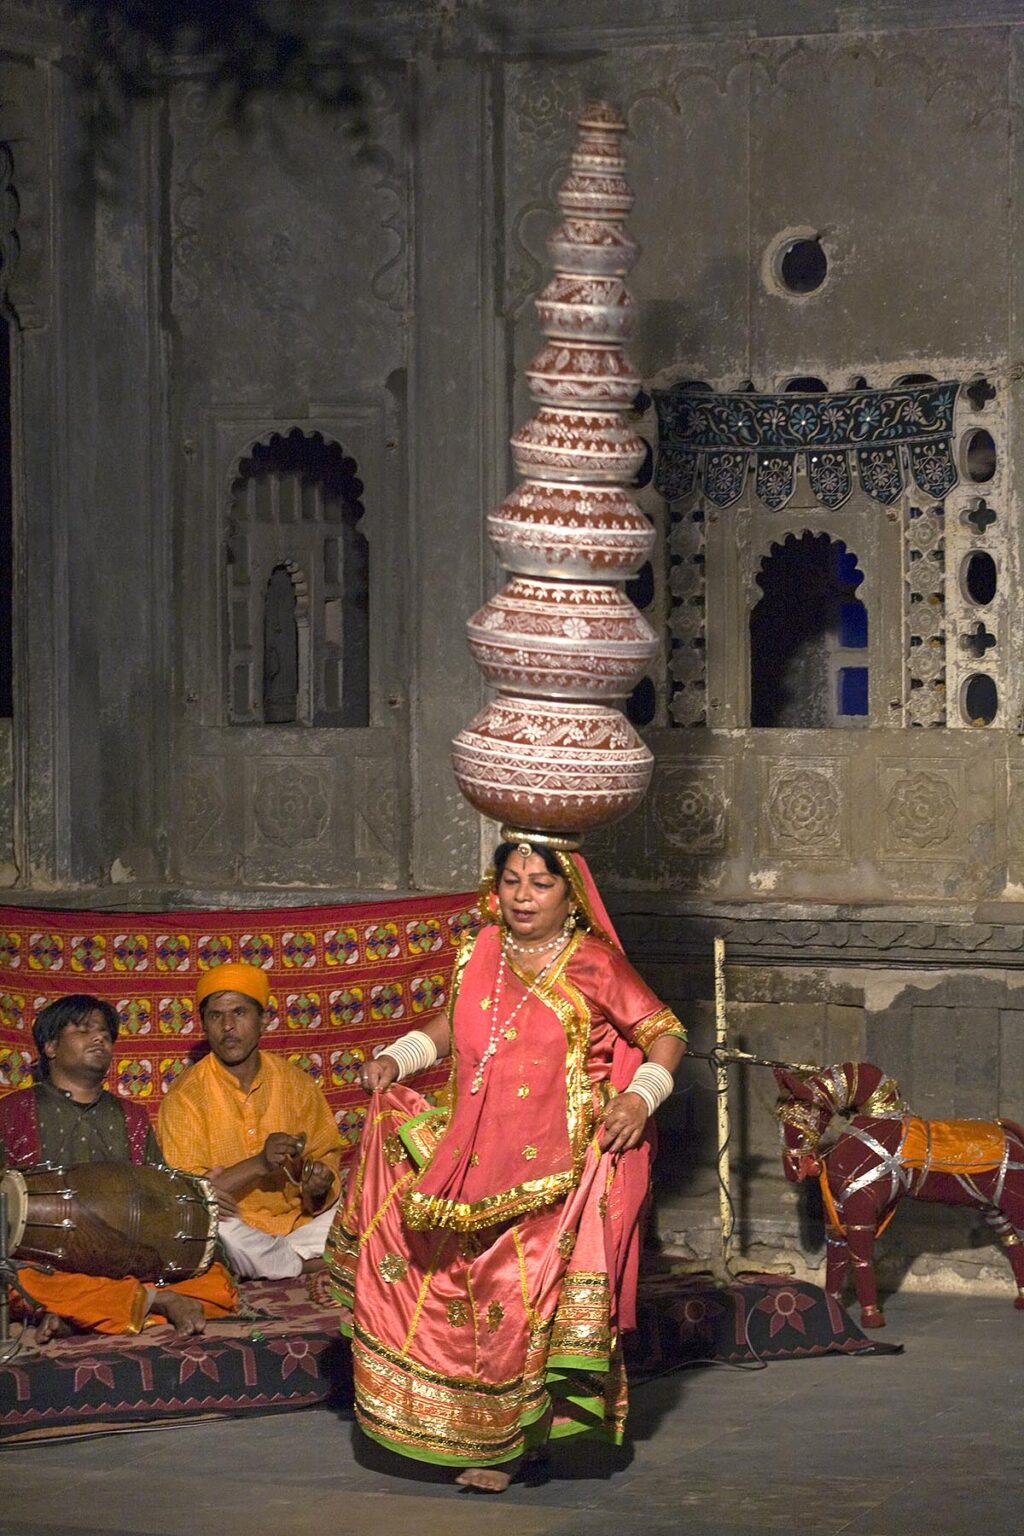 A Rajasthani woman performing a traditional DANCE carrying nine water jugs on her head at the BAGORE KI HAVELI in UDAIPUR - RAJASTHAN, INDIA